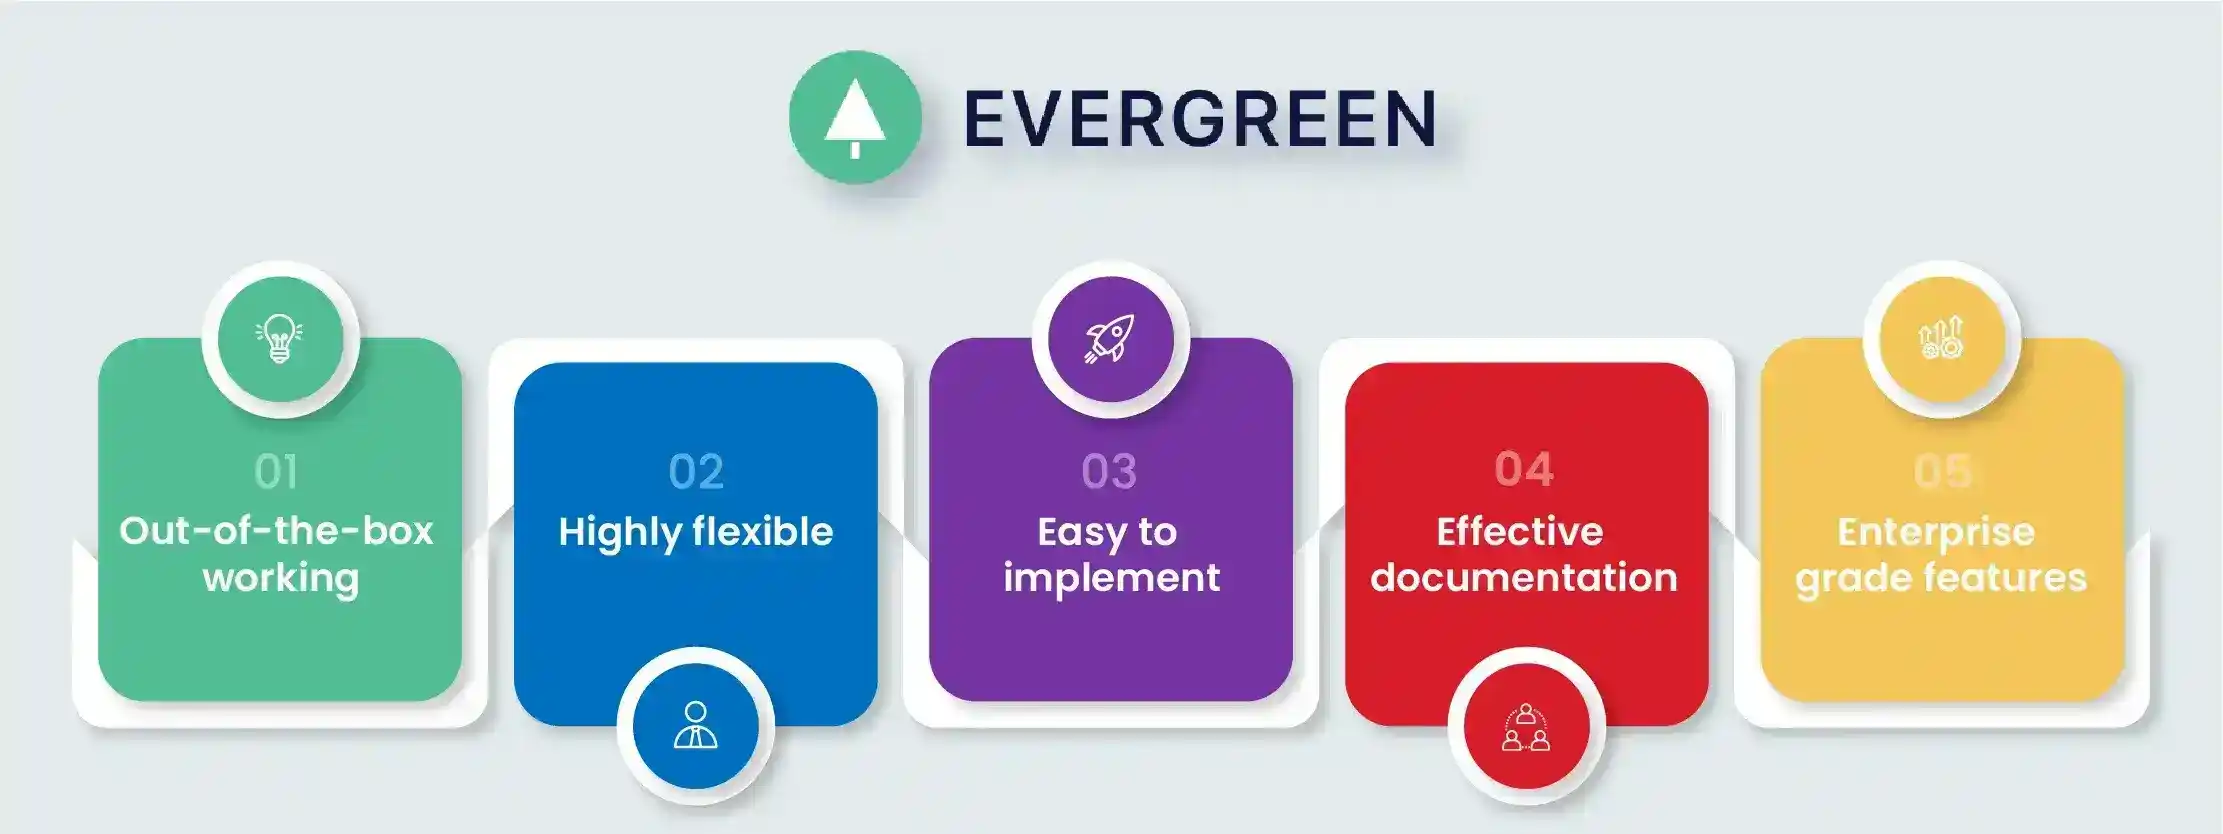 Benefits of Evergreen in React Native